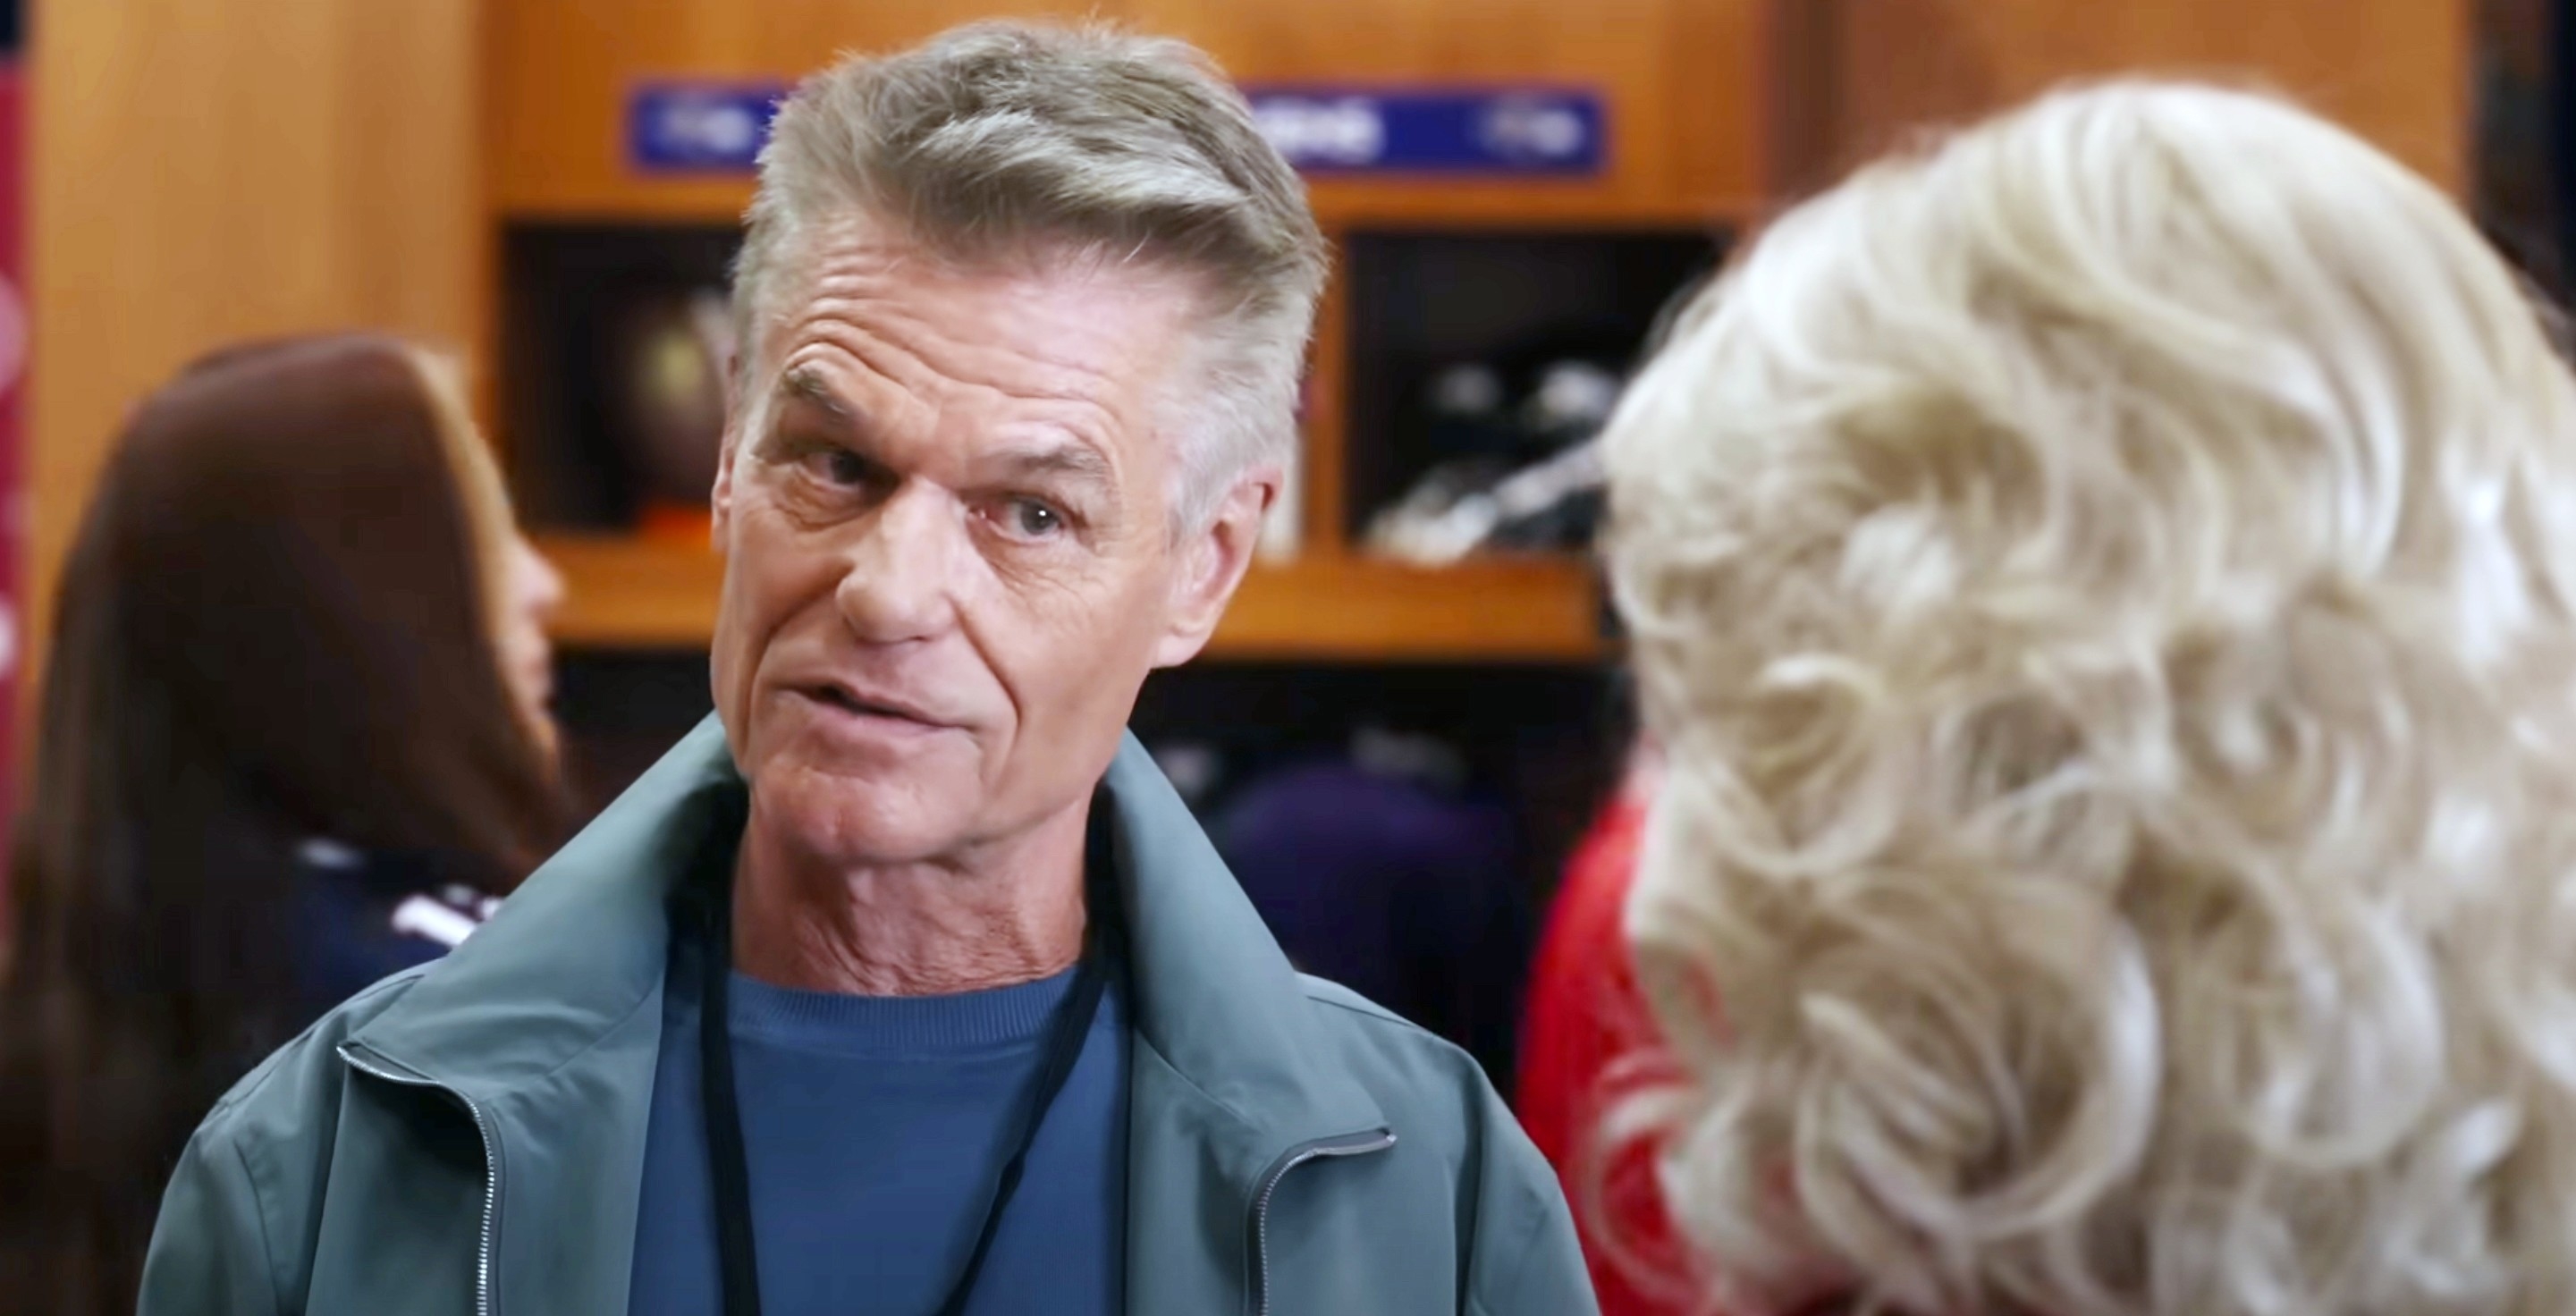 71-year-old Harry Hamlin in a jacket conversing with an older blonde woman in the film 80 For Brady